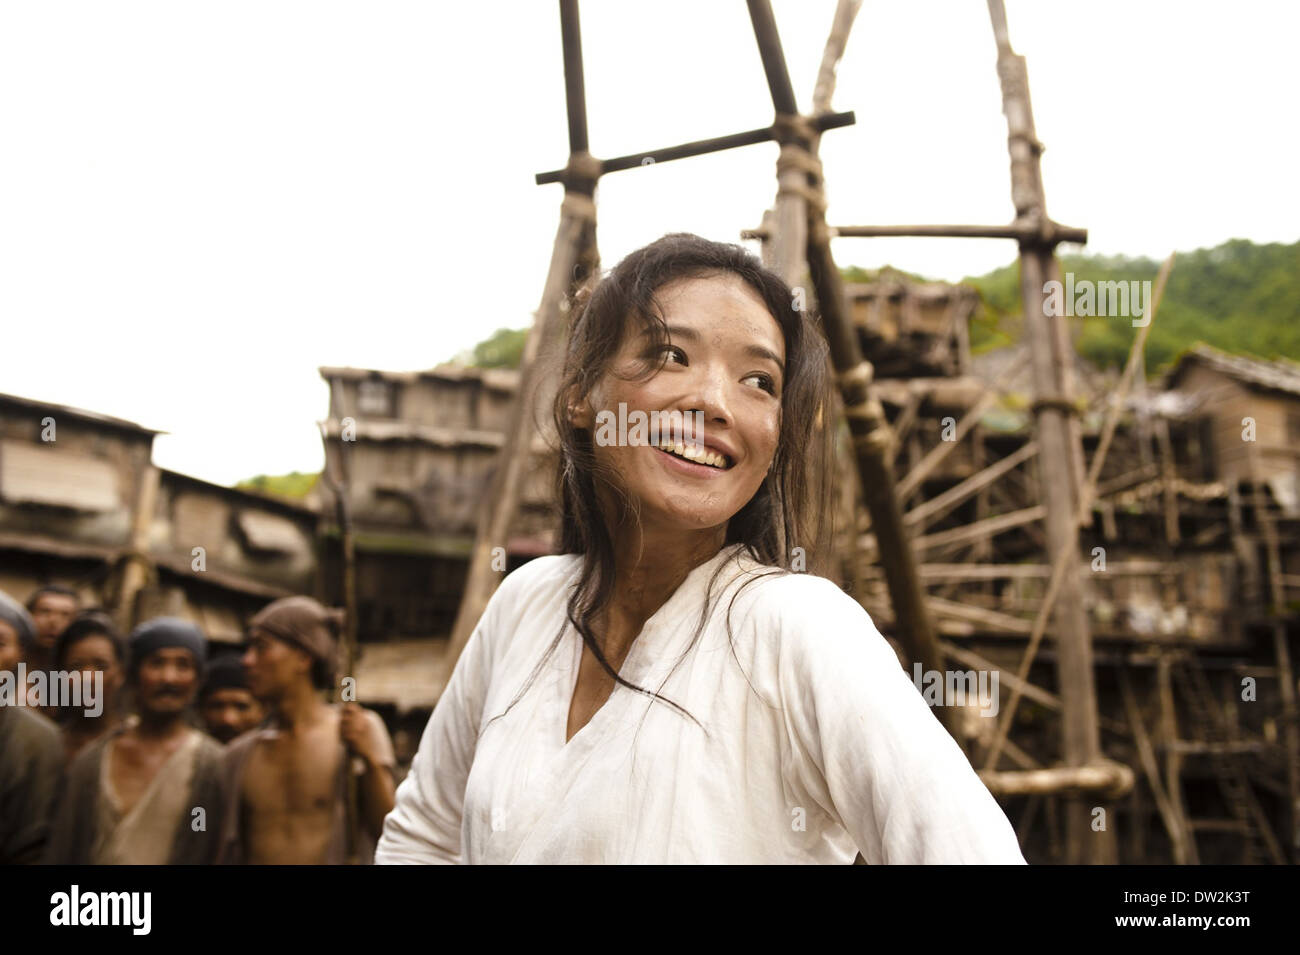 JOURNEY TO THE WEST 2014 Magnet Releasing film with Shu Qi Stock Photo